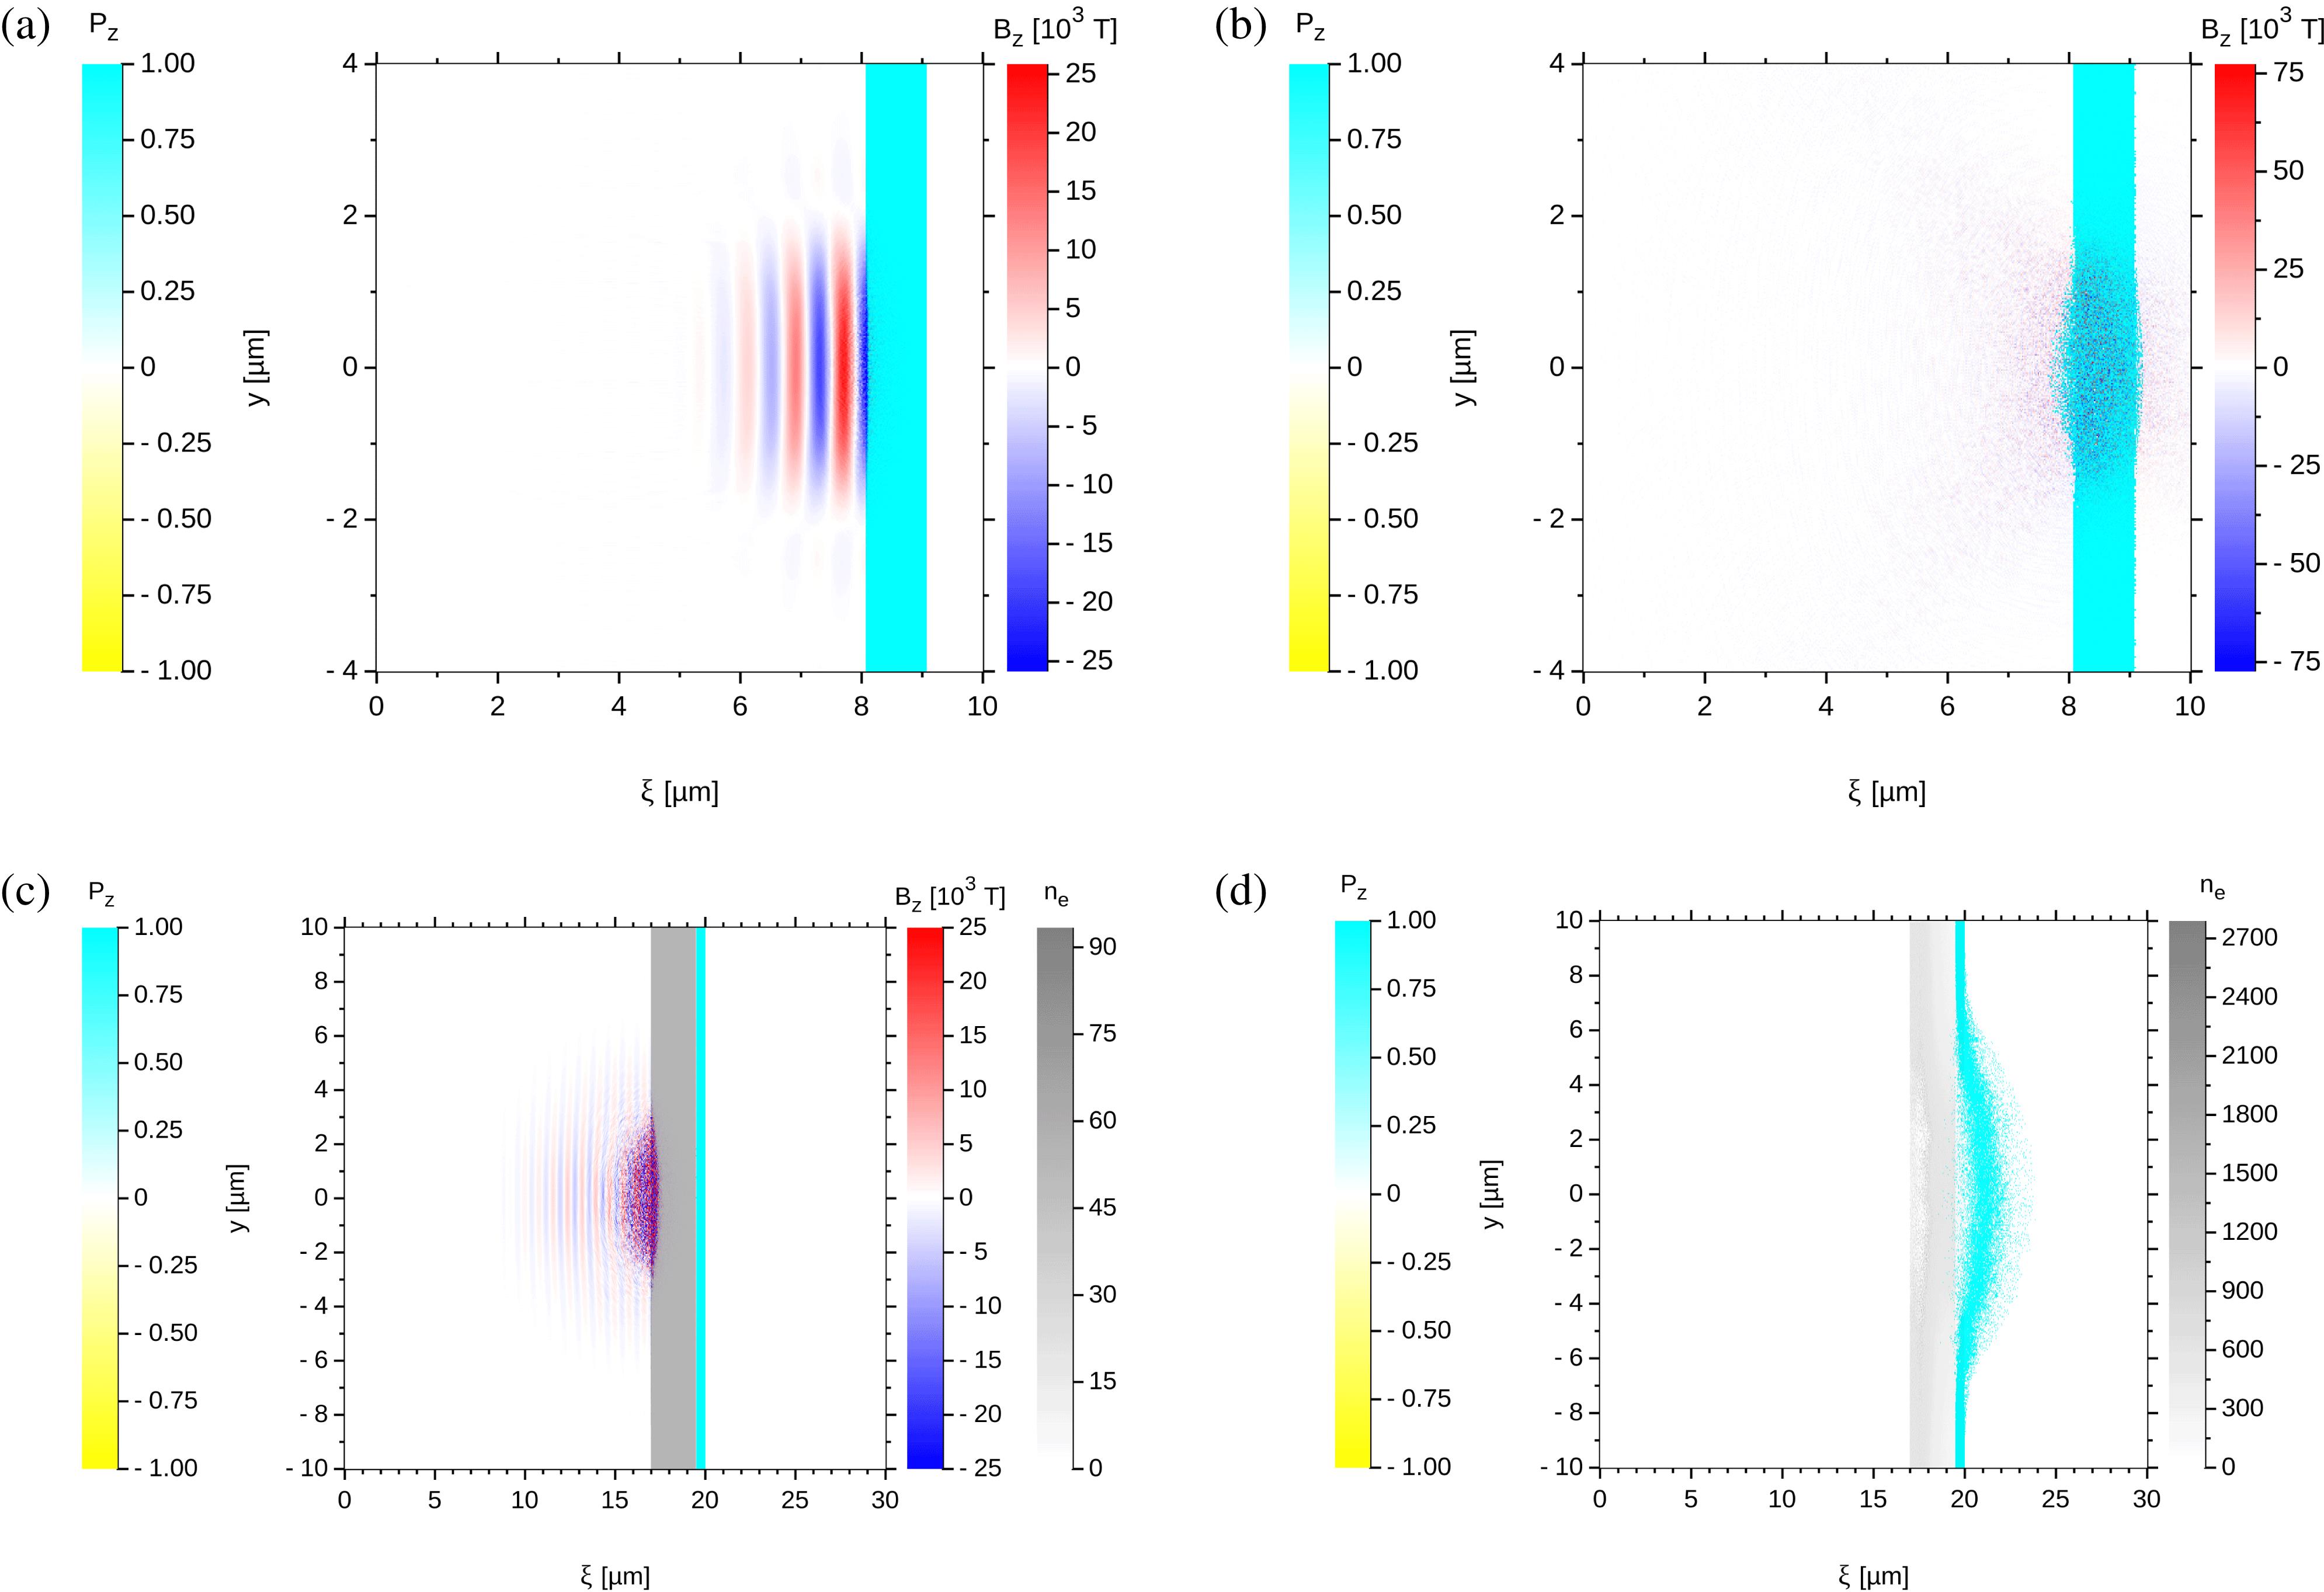 3D VLPL simulations showing the conservation of proton polarization in two polarized target geometries after interaction with a laser pulse ($\unicode[STIX]{x1D706}_{L}=800~\text{nm}$, normalized laser amplitude $a_{0}=12$, 25 fs duration, $5~\unicode[STIX]{x03BC}\text{m}$ focal spot size) impinging from the left side of the simulation box.